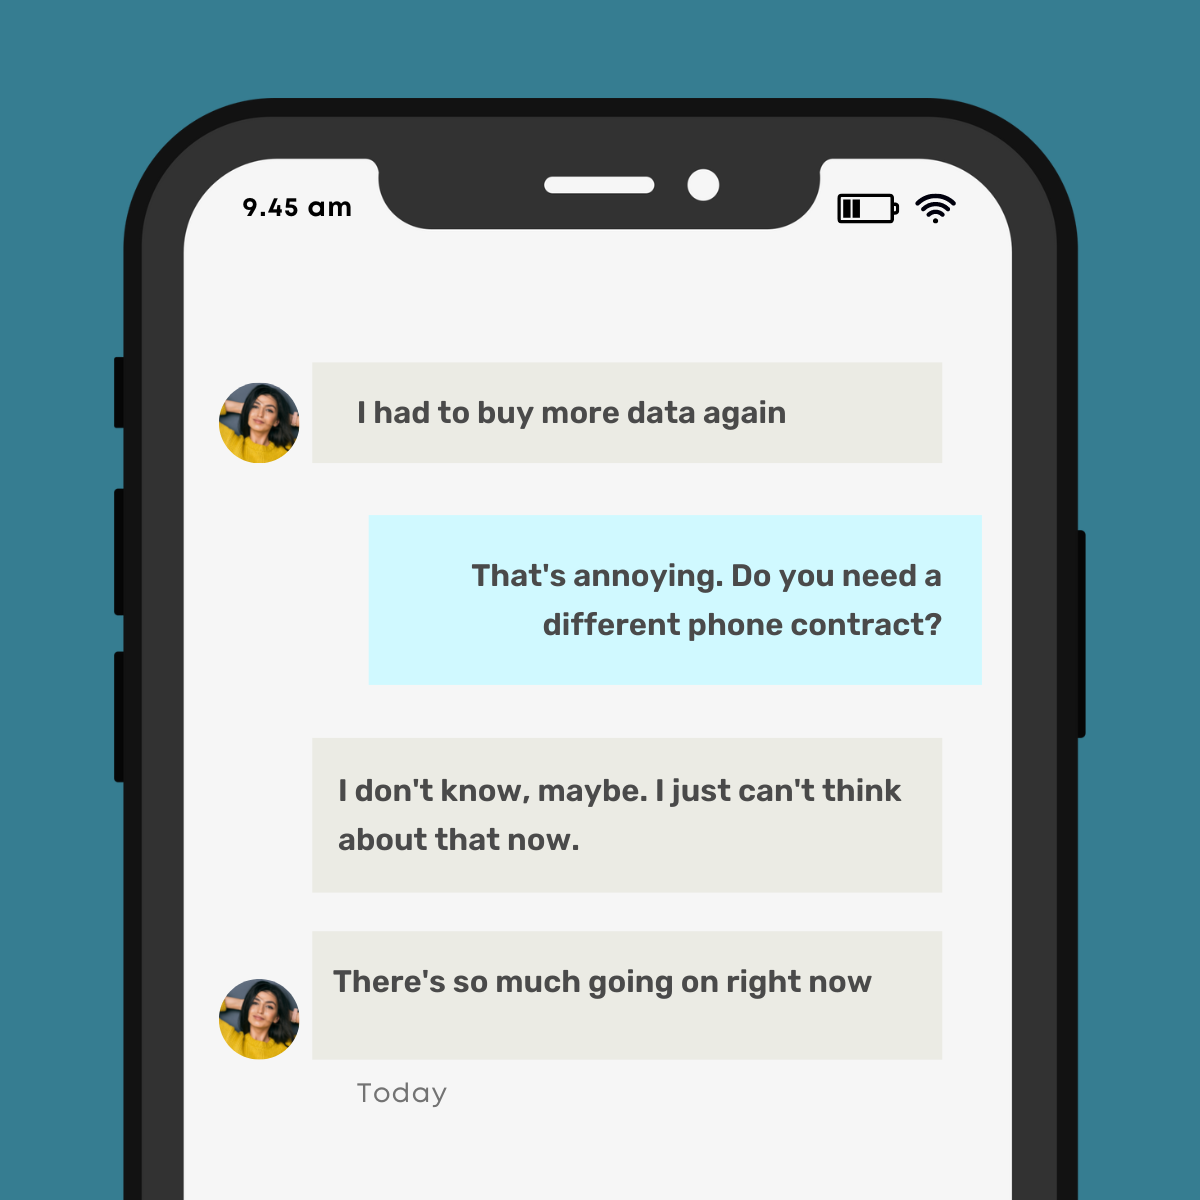 Illustration of a text conversation on a phone. The first person says "I had to buy more data again." The second replies, "That's annoying, do you need a different phone contract?" The first responds "I don't know, maybe, I just can't think about that now. There's so much going on right now."